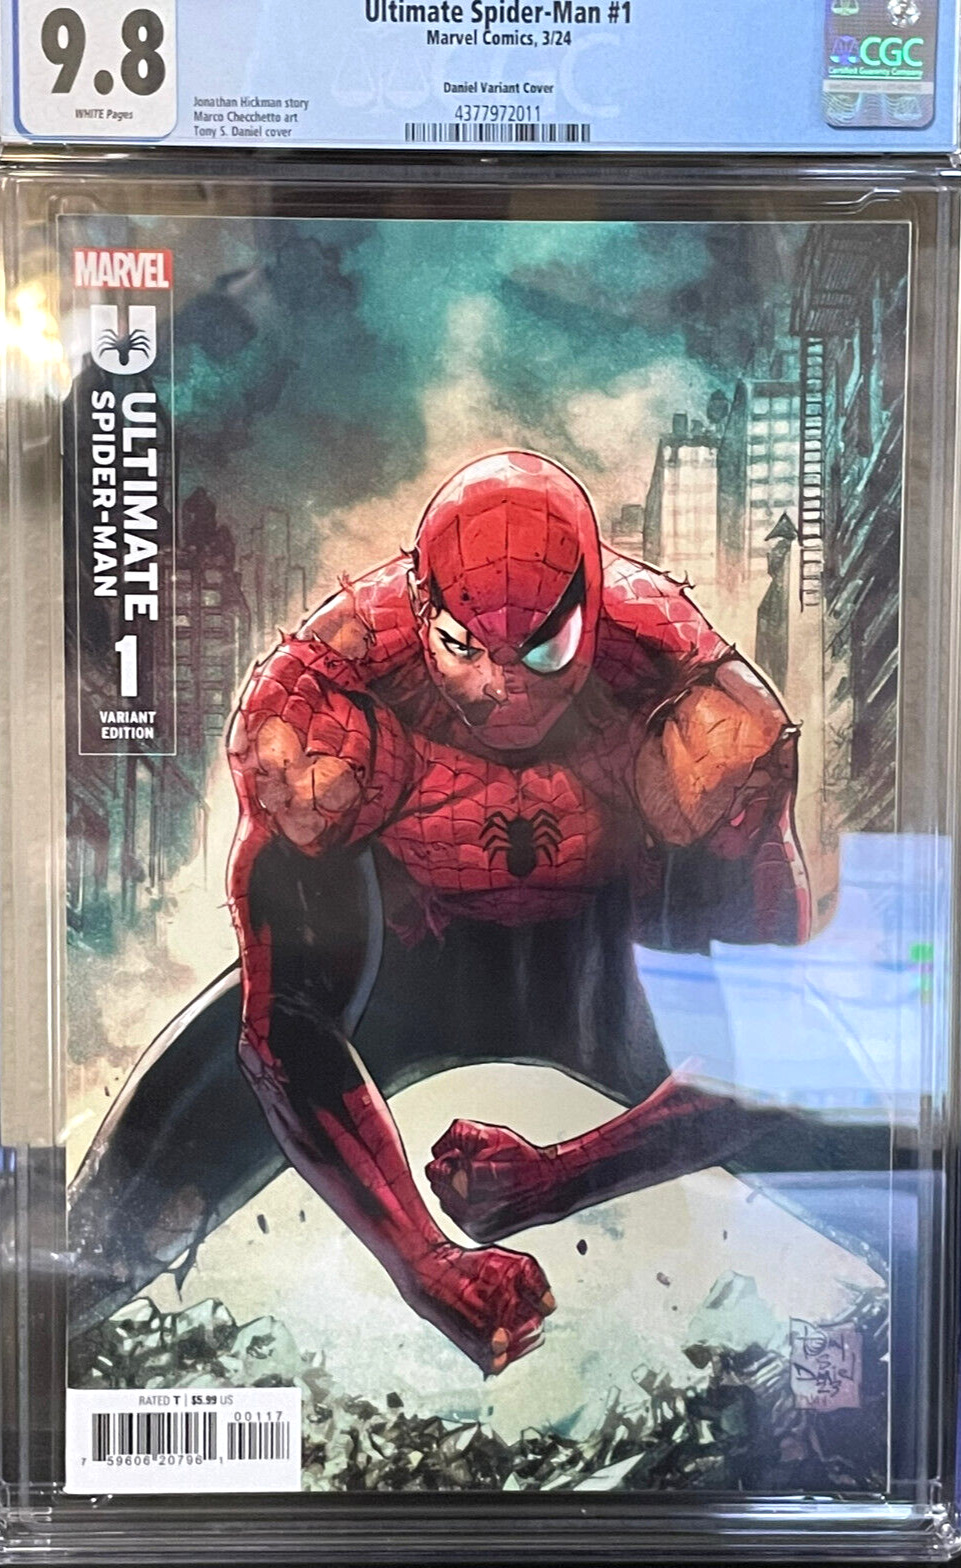 Ultimate Spider-Man #1 CGC 9.8 1:25 Daniel Variant Hickman HOT COMIC IN HAND WOW